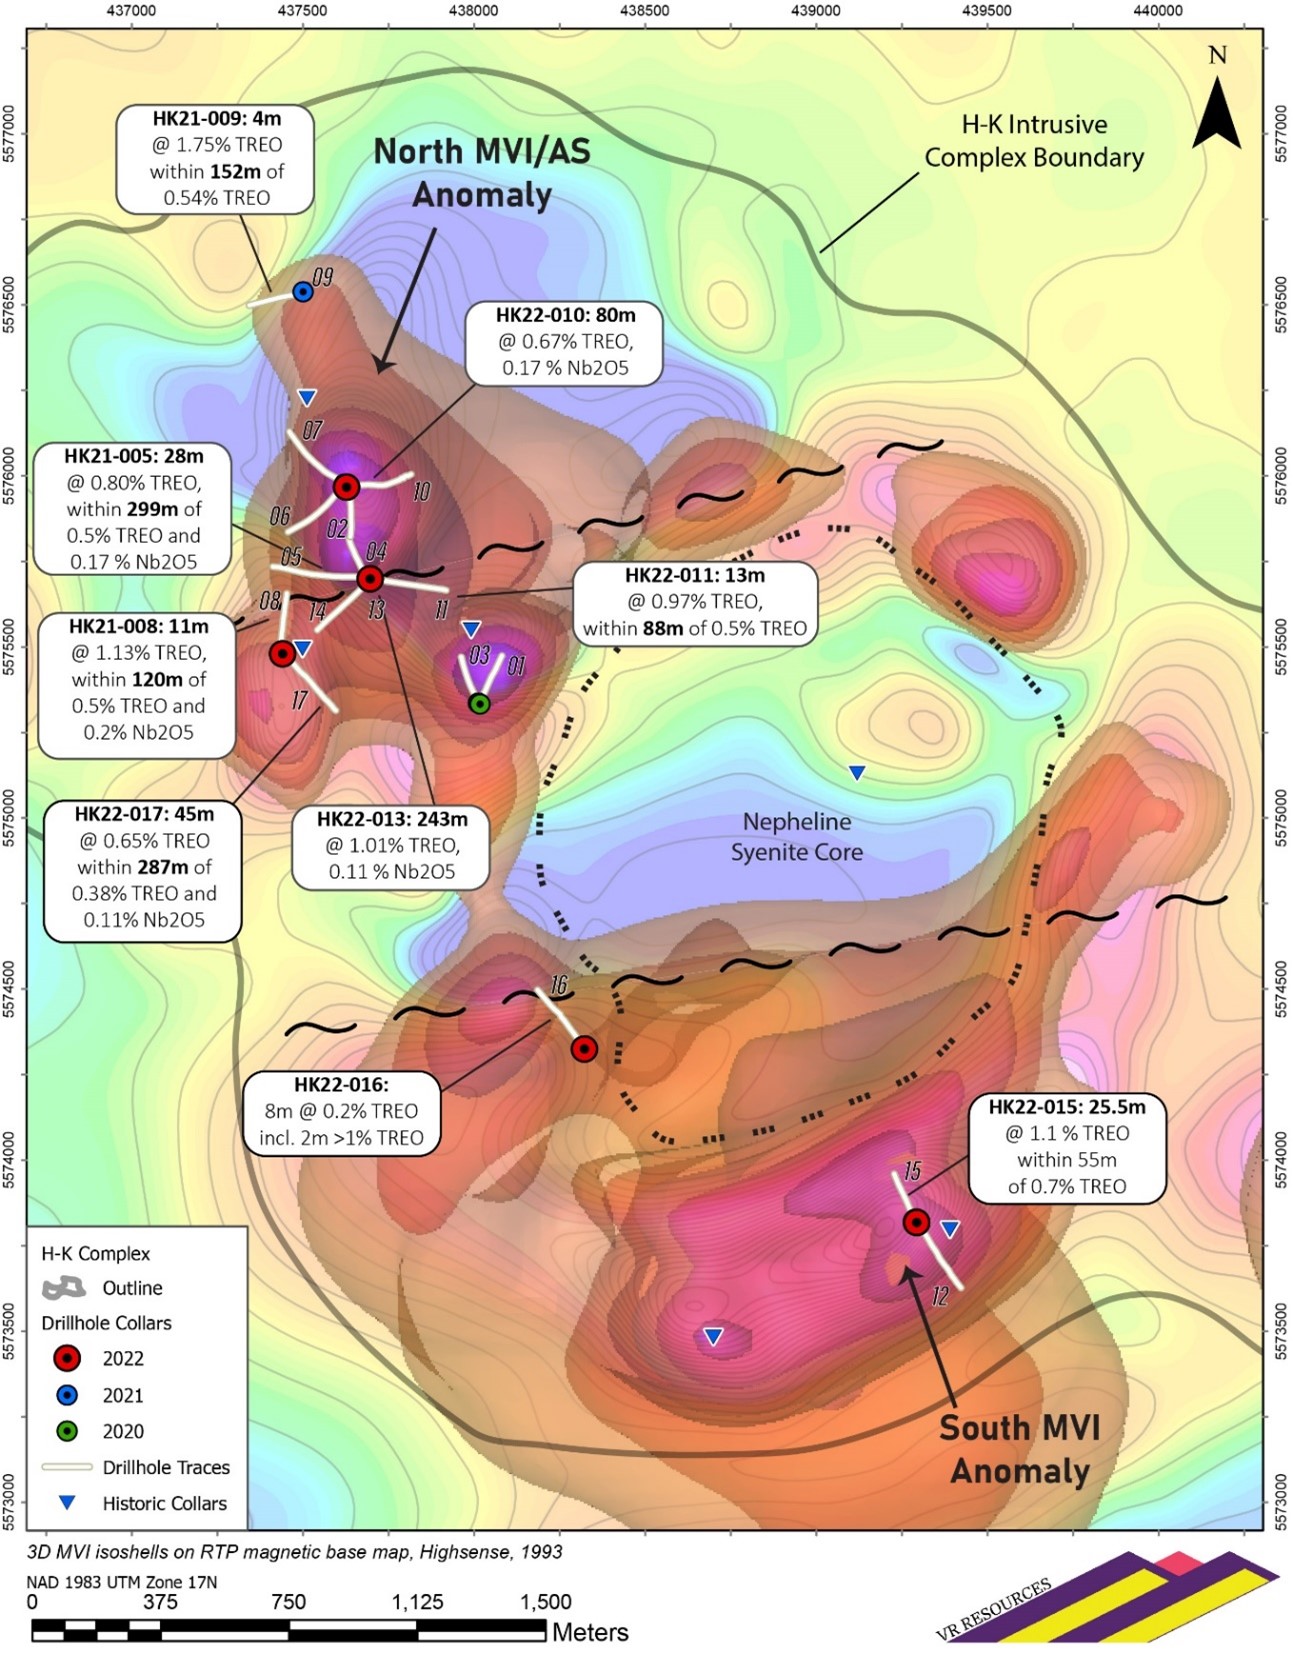 Key critical metal intersections from the first 17 drill holes completed at Hecla-Kilmer, plotted on a contoured RTP magnetic base map with superimposed 3D isoshells from the MVI inversion. The fourth drill program now underway in October, 2022, will focus on two of the three areas with high grade TREO mineralization: 1. Hole 15 area in the northwestern part of the multiphase complex, and; 2. Hole 15 area located some 2.5 km to the south in the south rim of the complex.